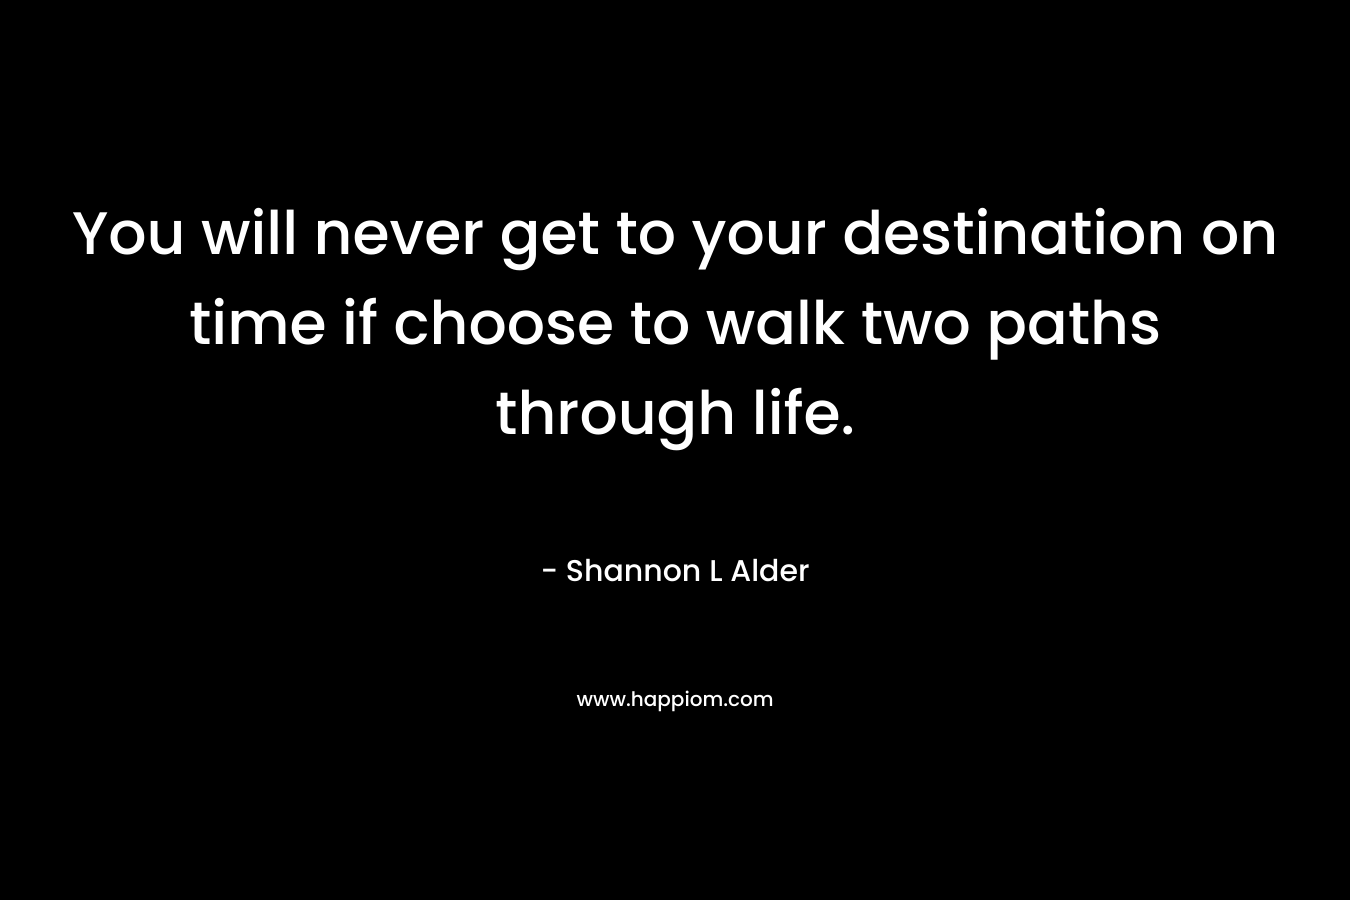 You will never get to your destination on time if choose to walk two paths through life.